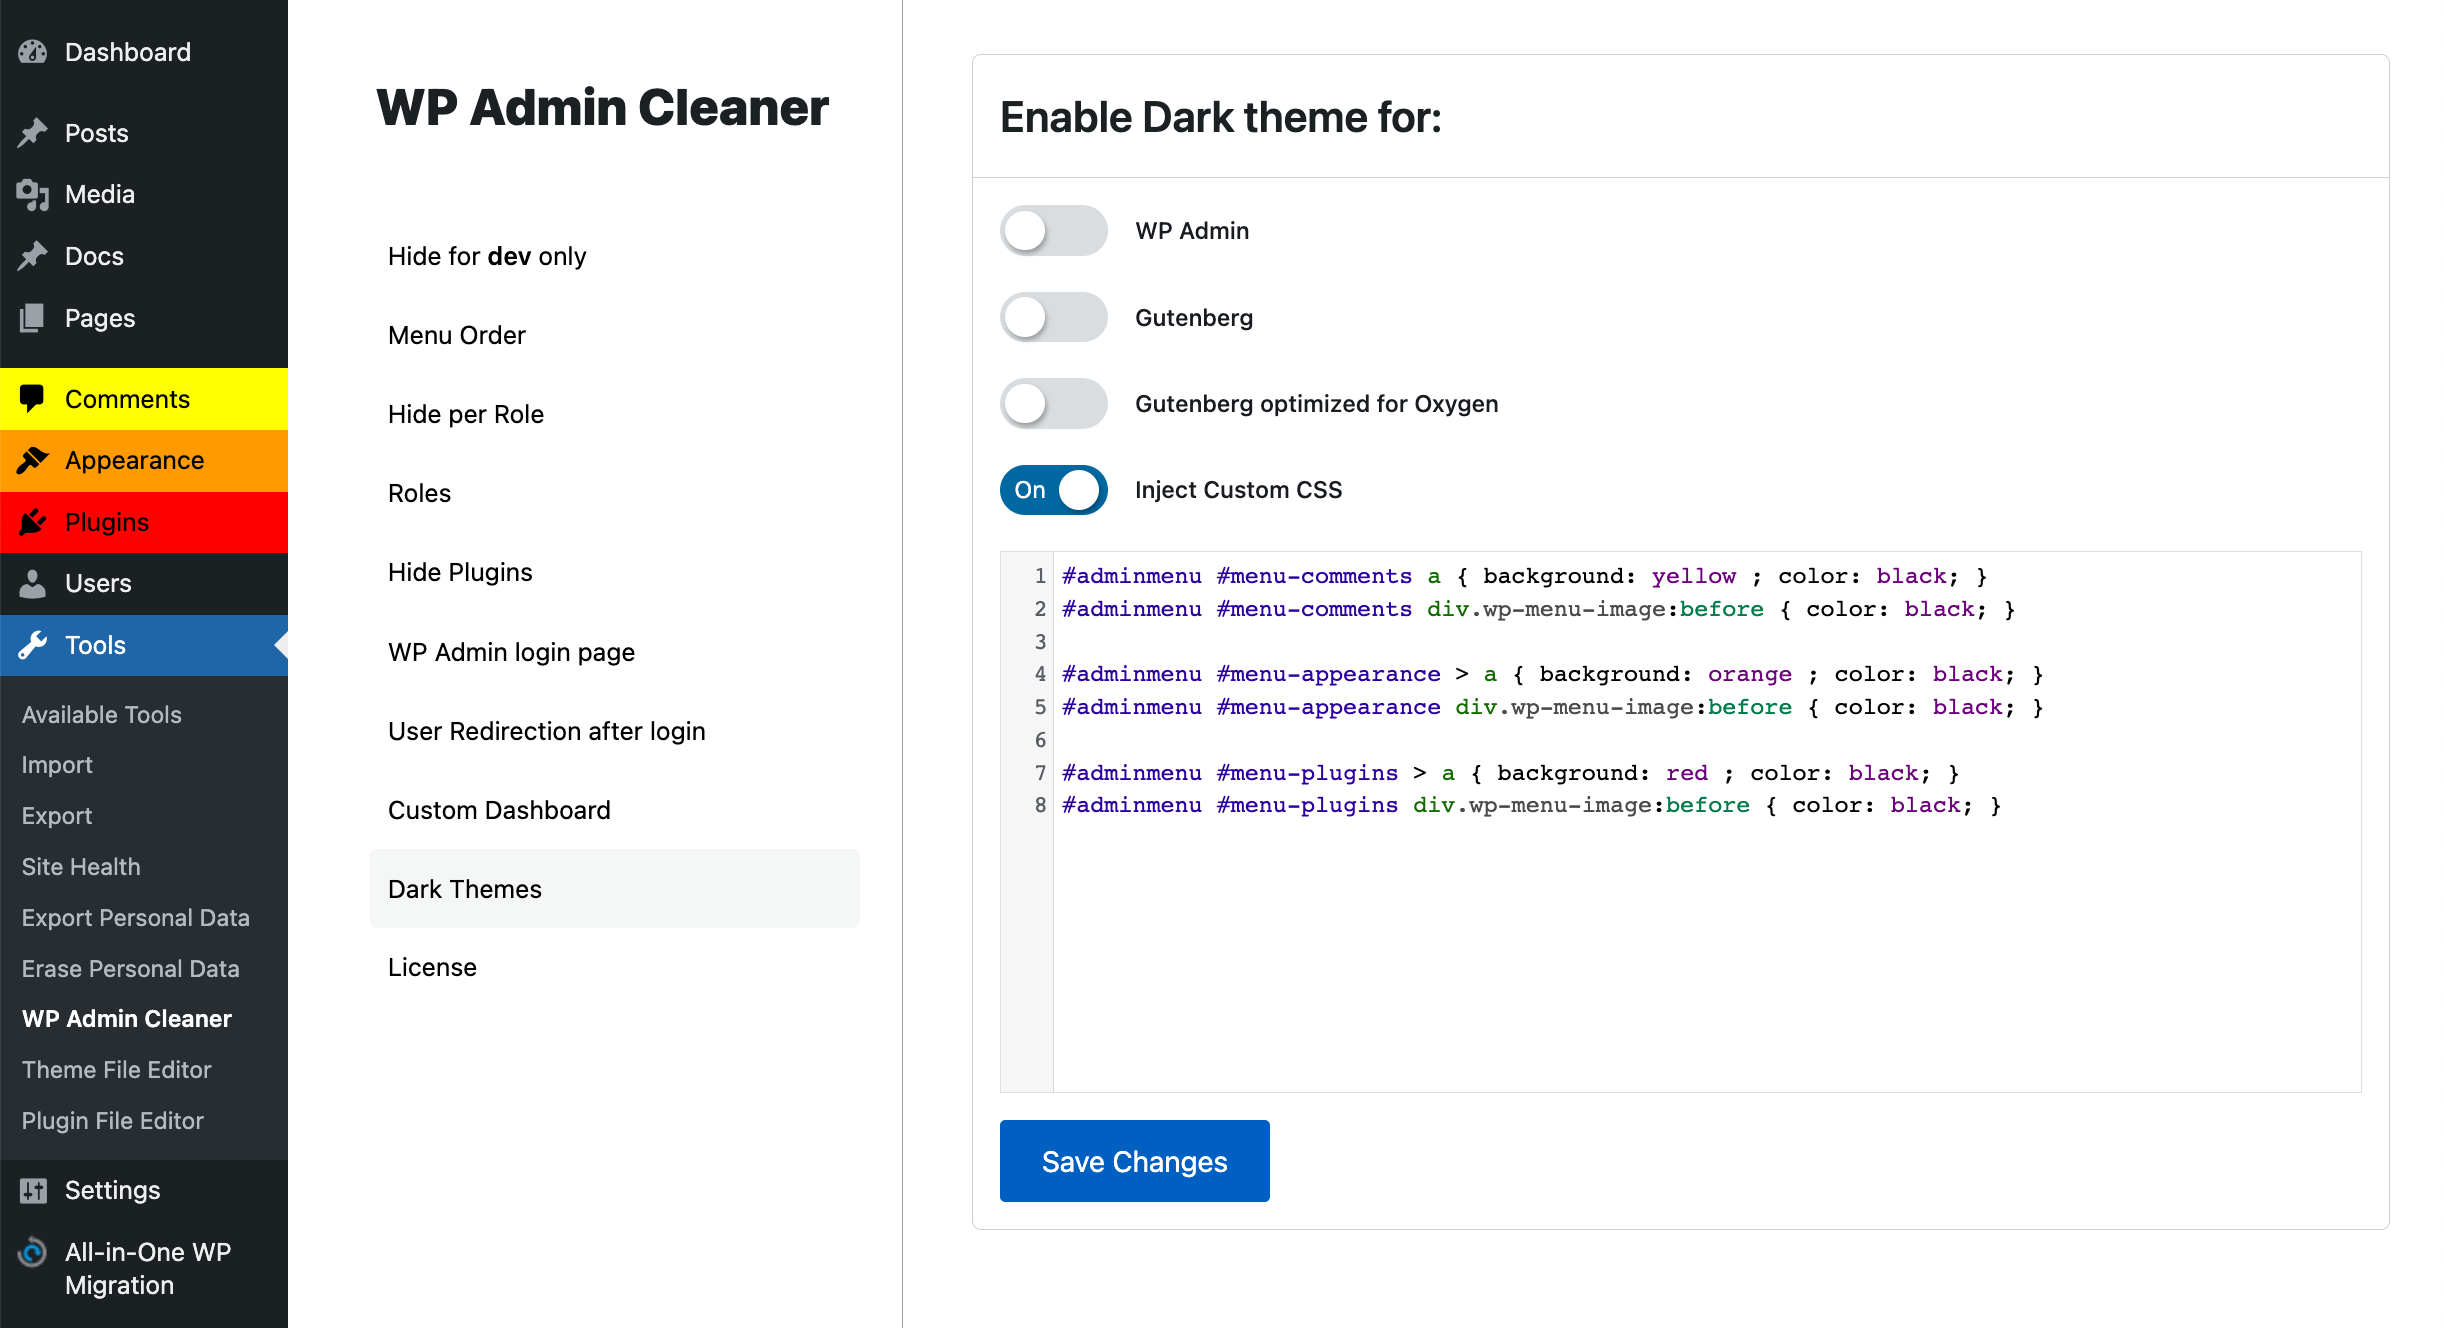 wp admin cleaner inject css into wp admin